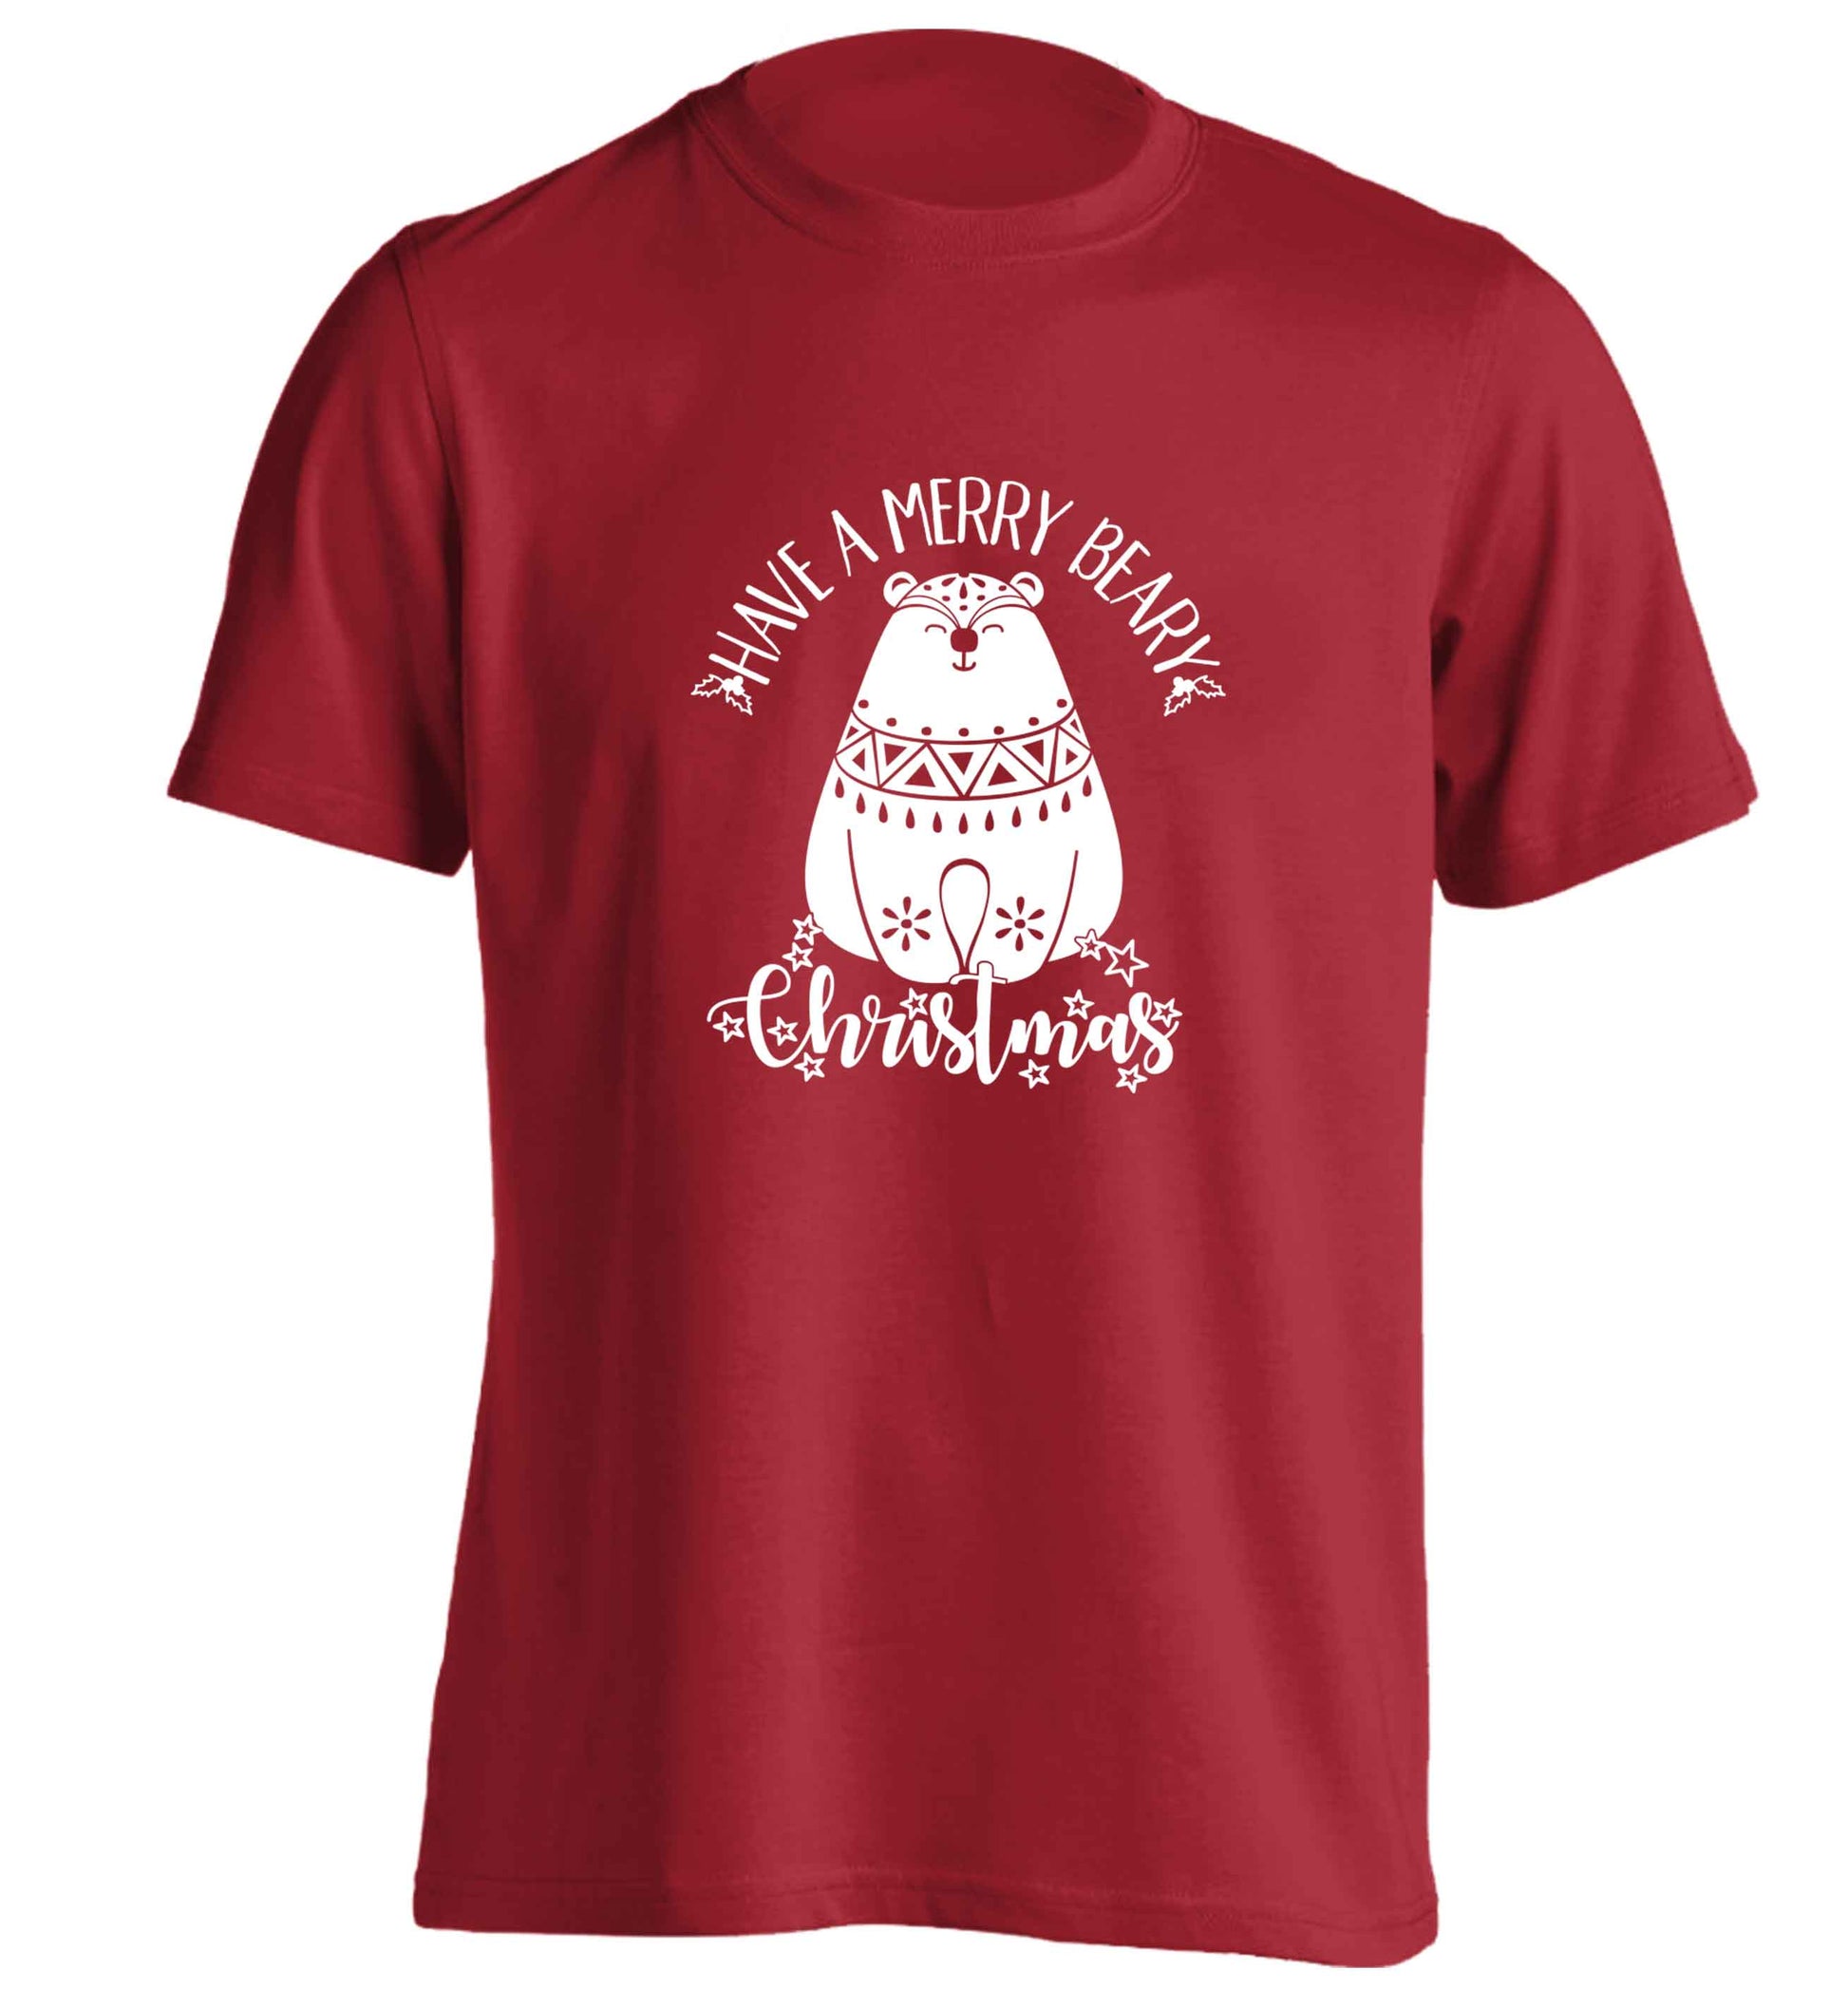 Have a merry beary Christmas adults unisex red Tshirt 2XL